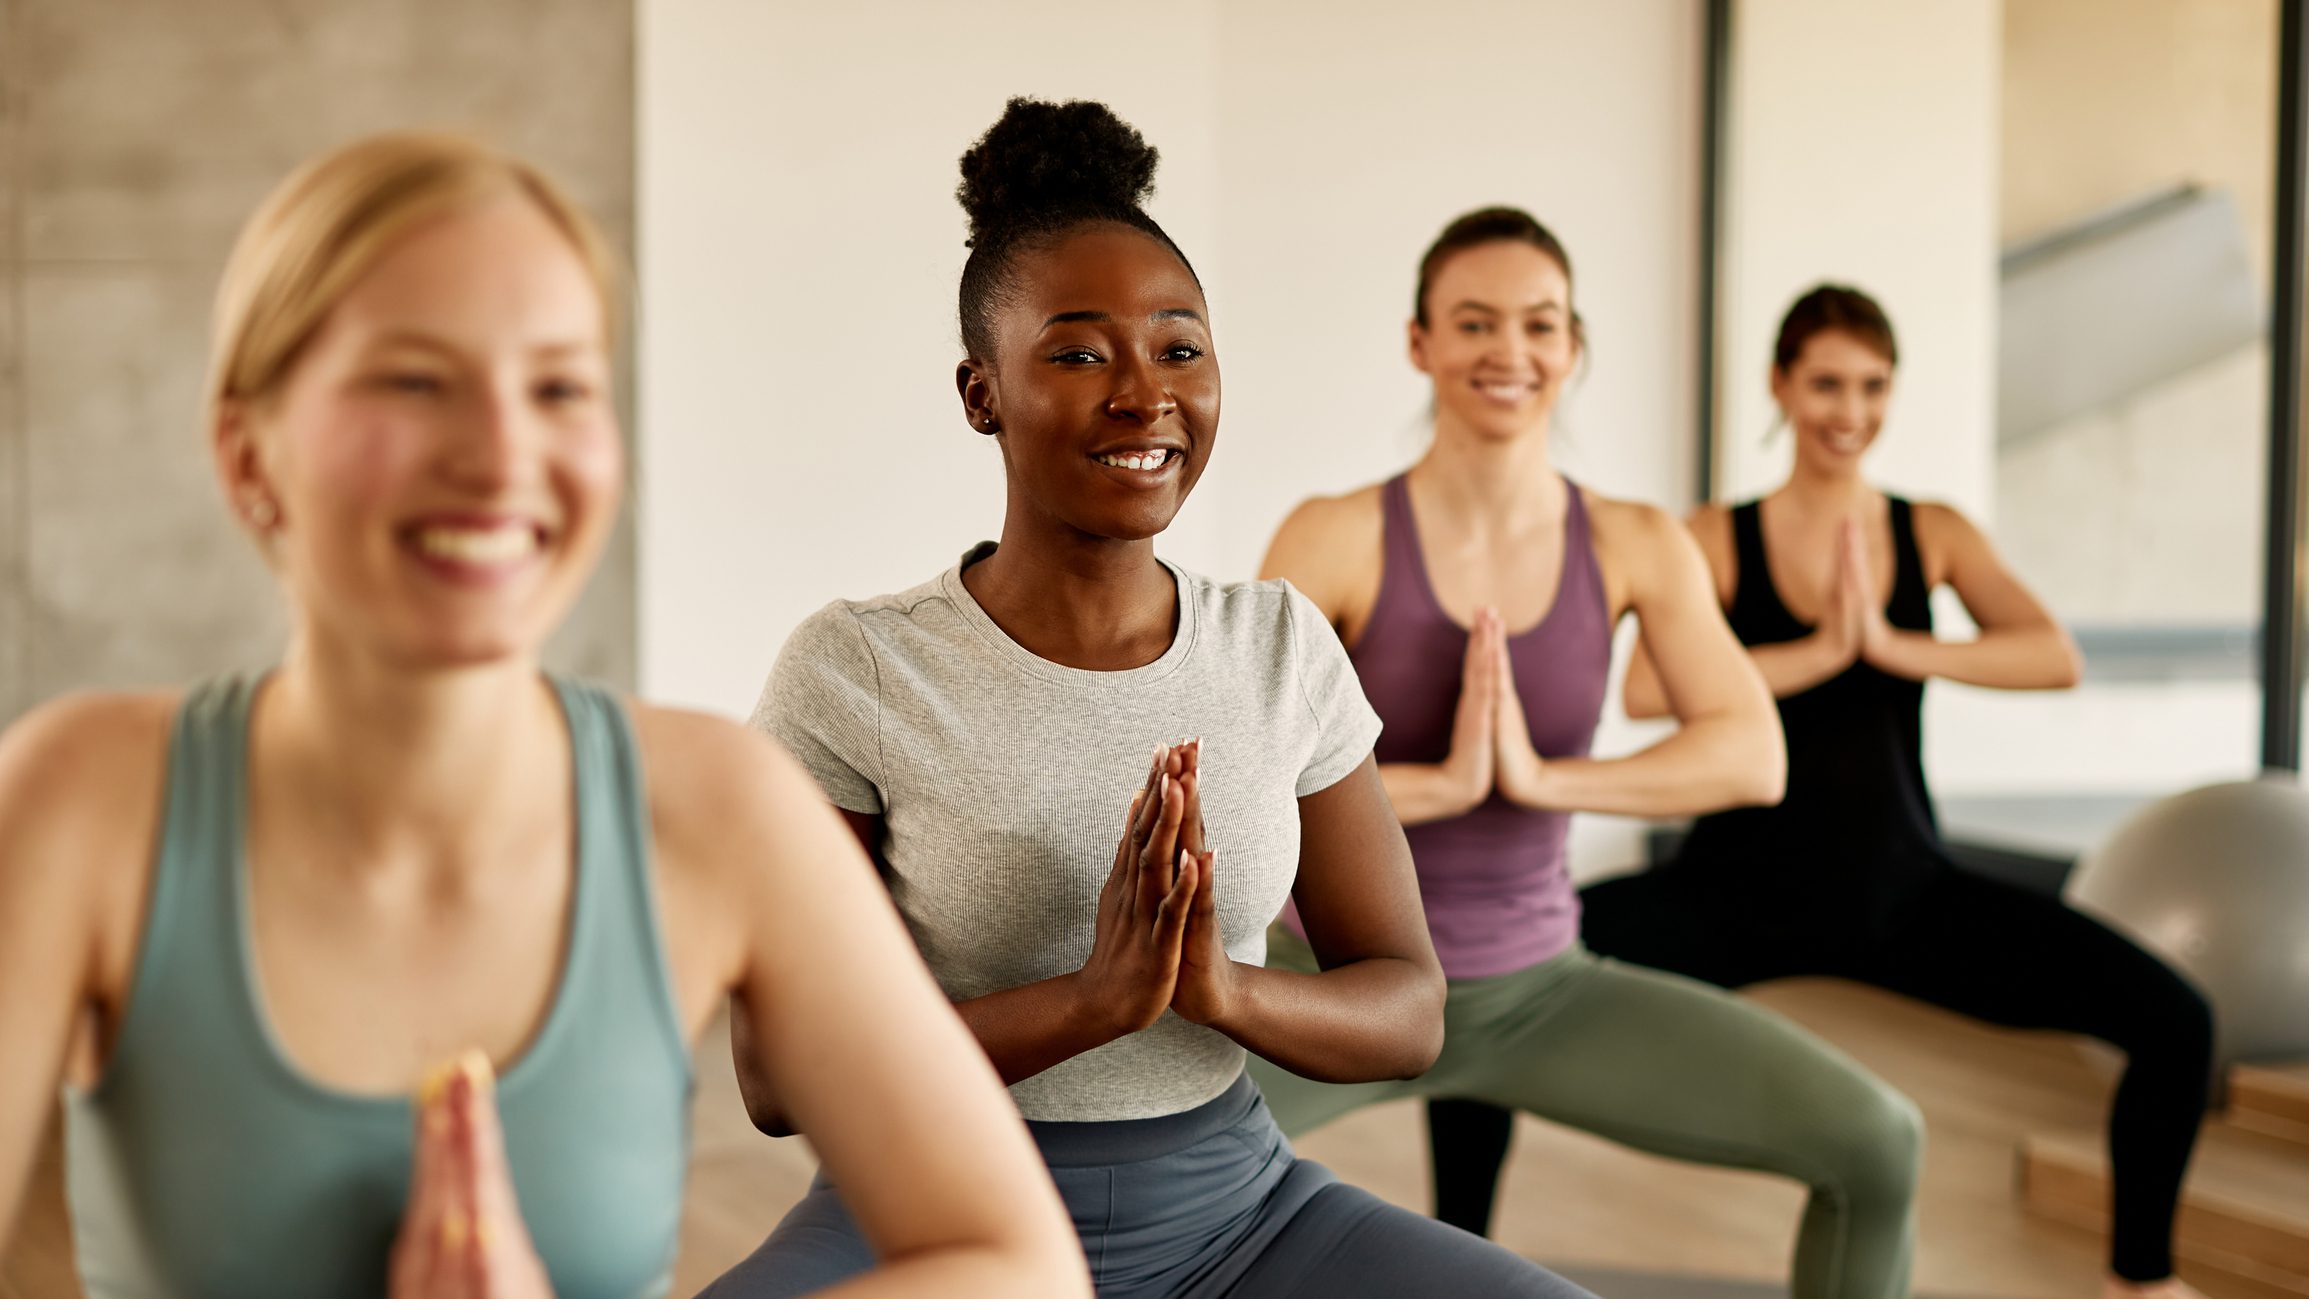 Happy African American female athlete practicing Yoga with group of women at health club.